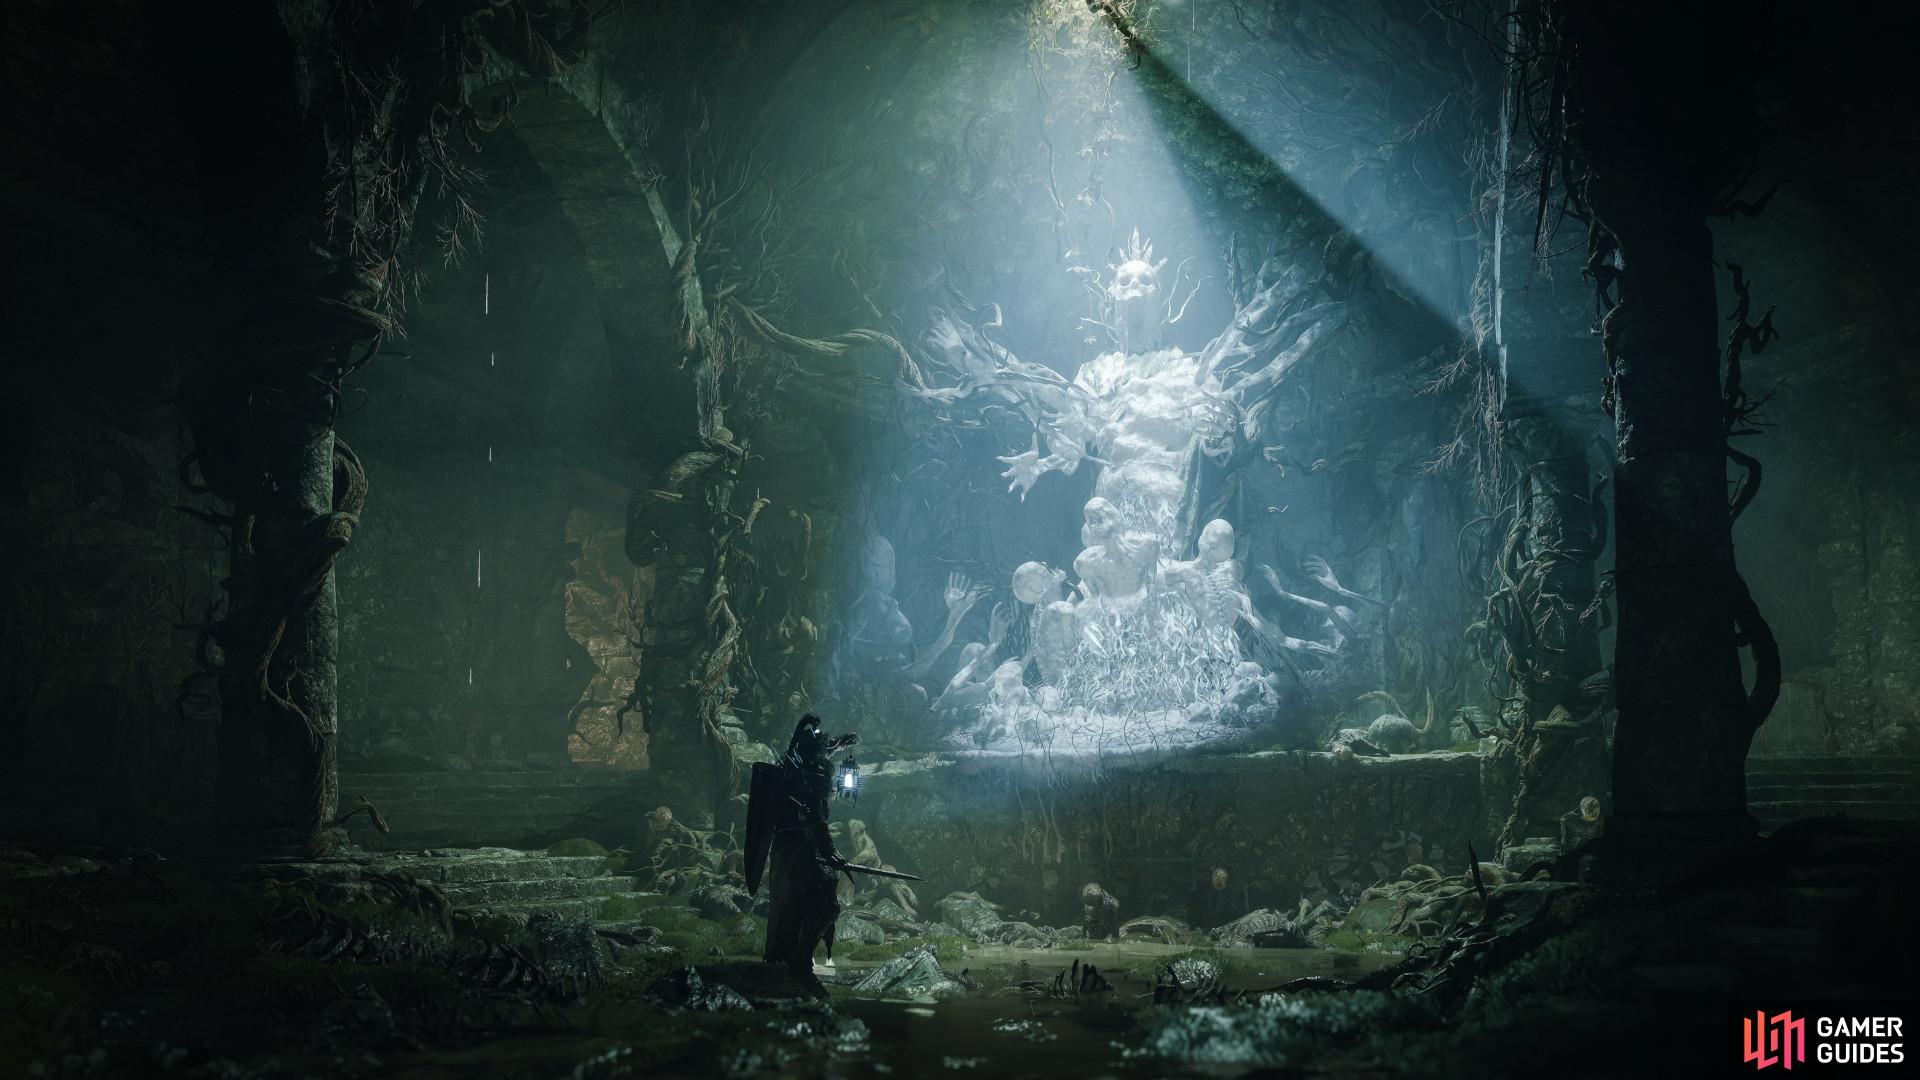 Hexworks updated the New Game Plus system in Lords of the Fallen to offer progressive challenges and an option for completionists looking for Pretty Platinum. Image via Hexworks.